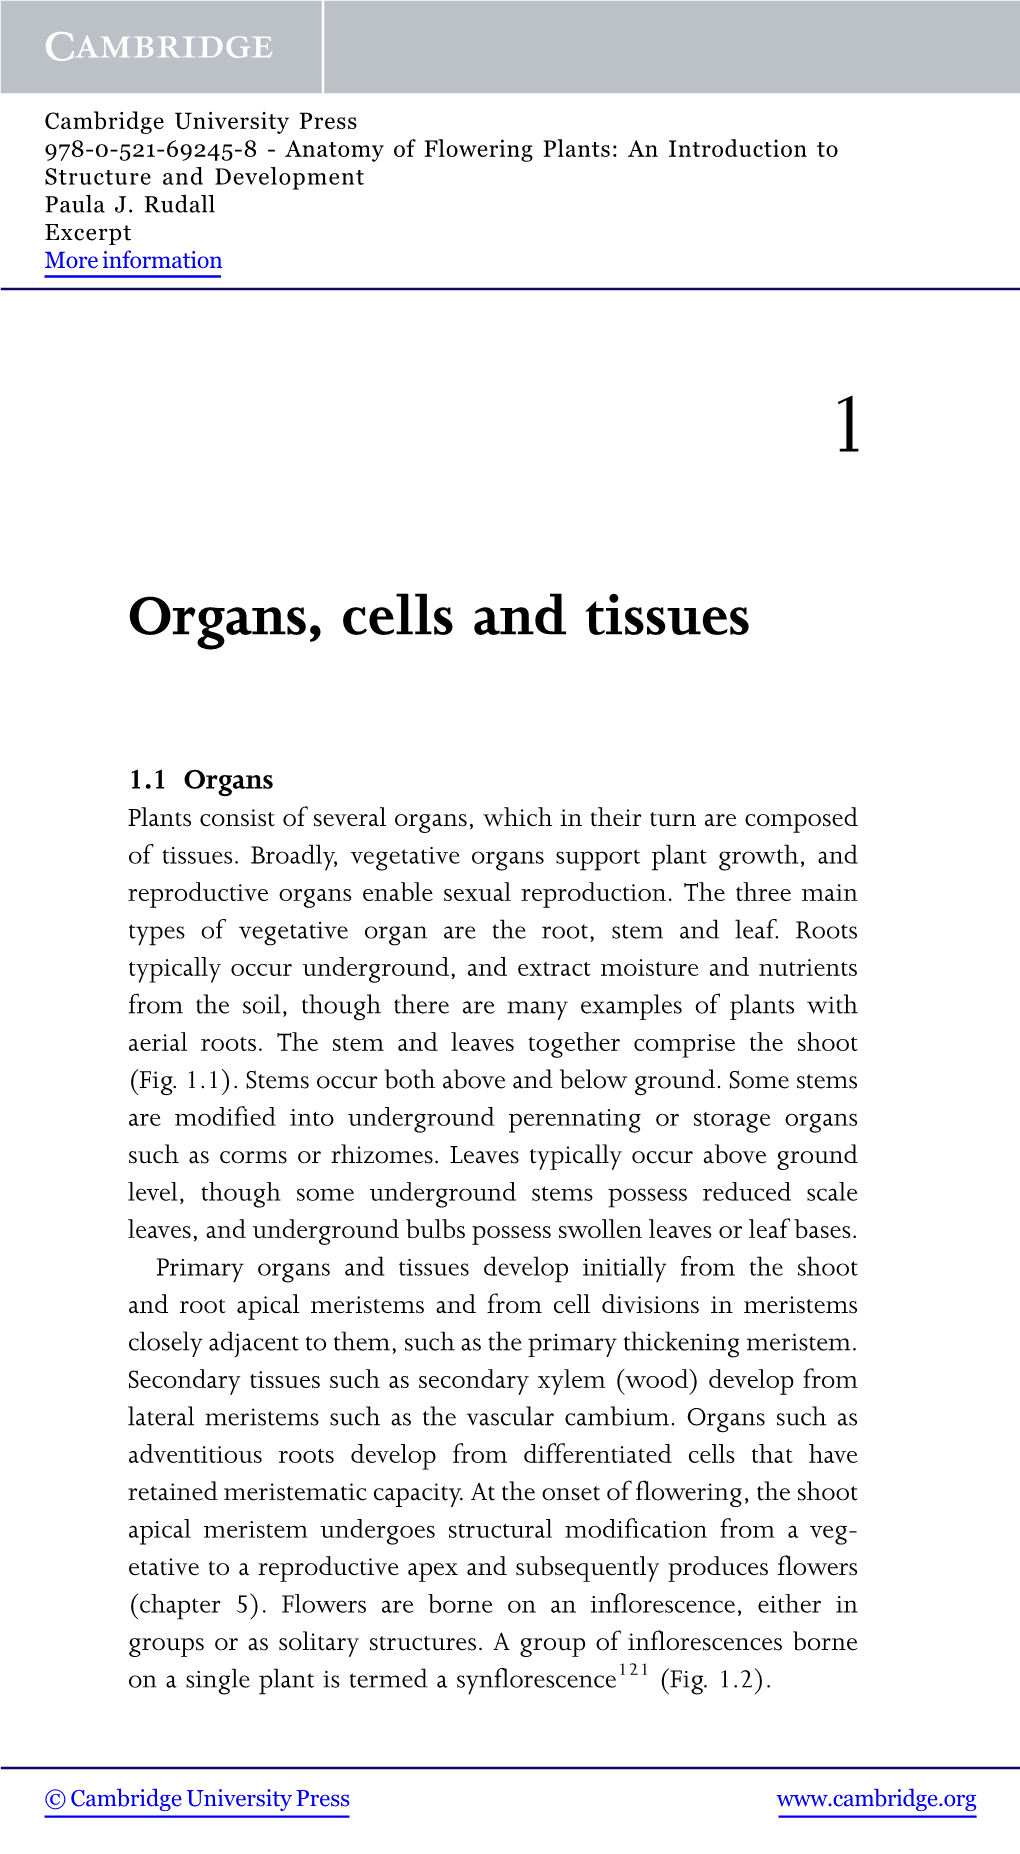 Organs, Cells and Tissues